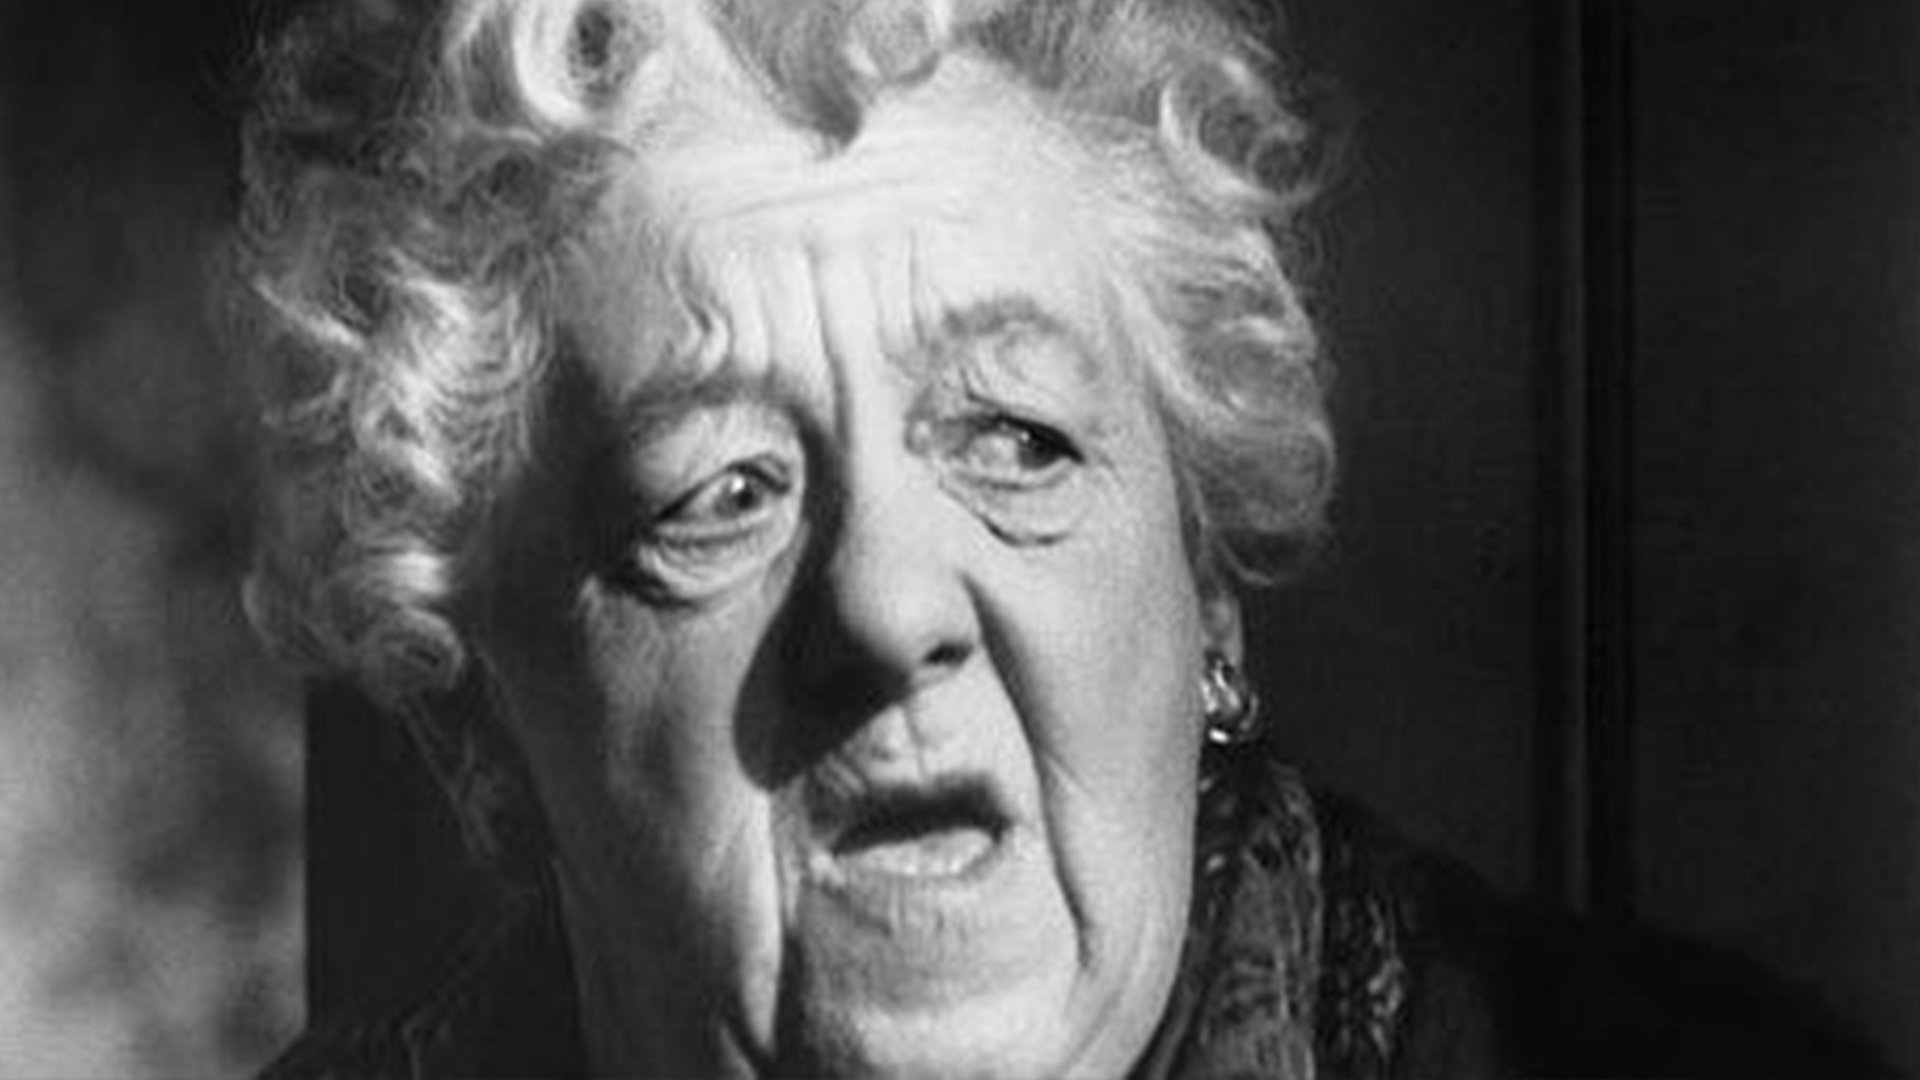 Truly Miss Marple - The Curious Case of Margaret Rutherford